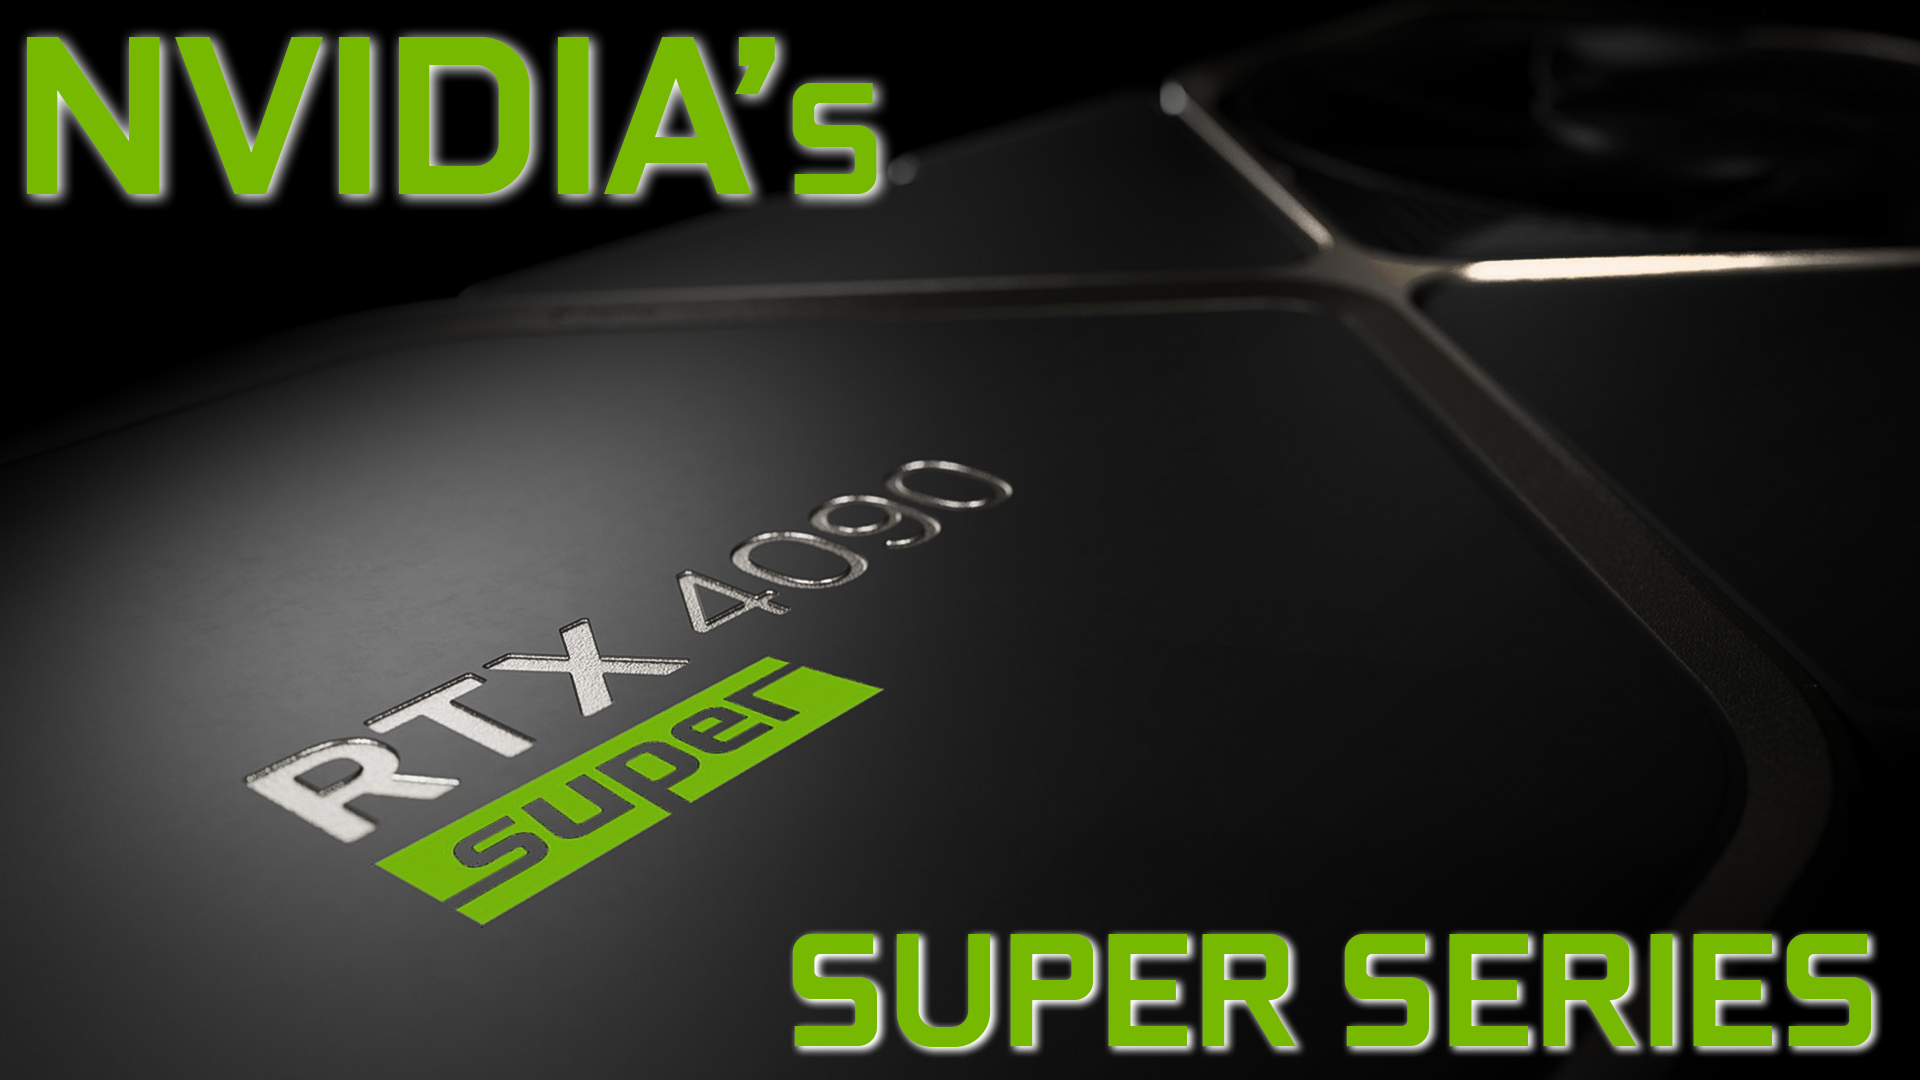 Here’s All You Need to Know about the New Geforce RTX Super Series